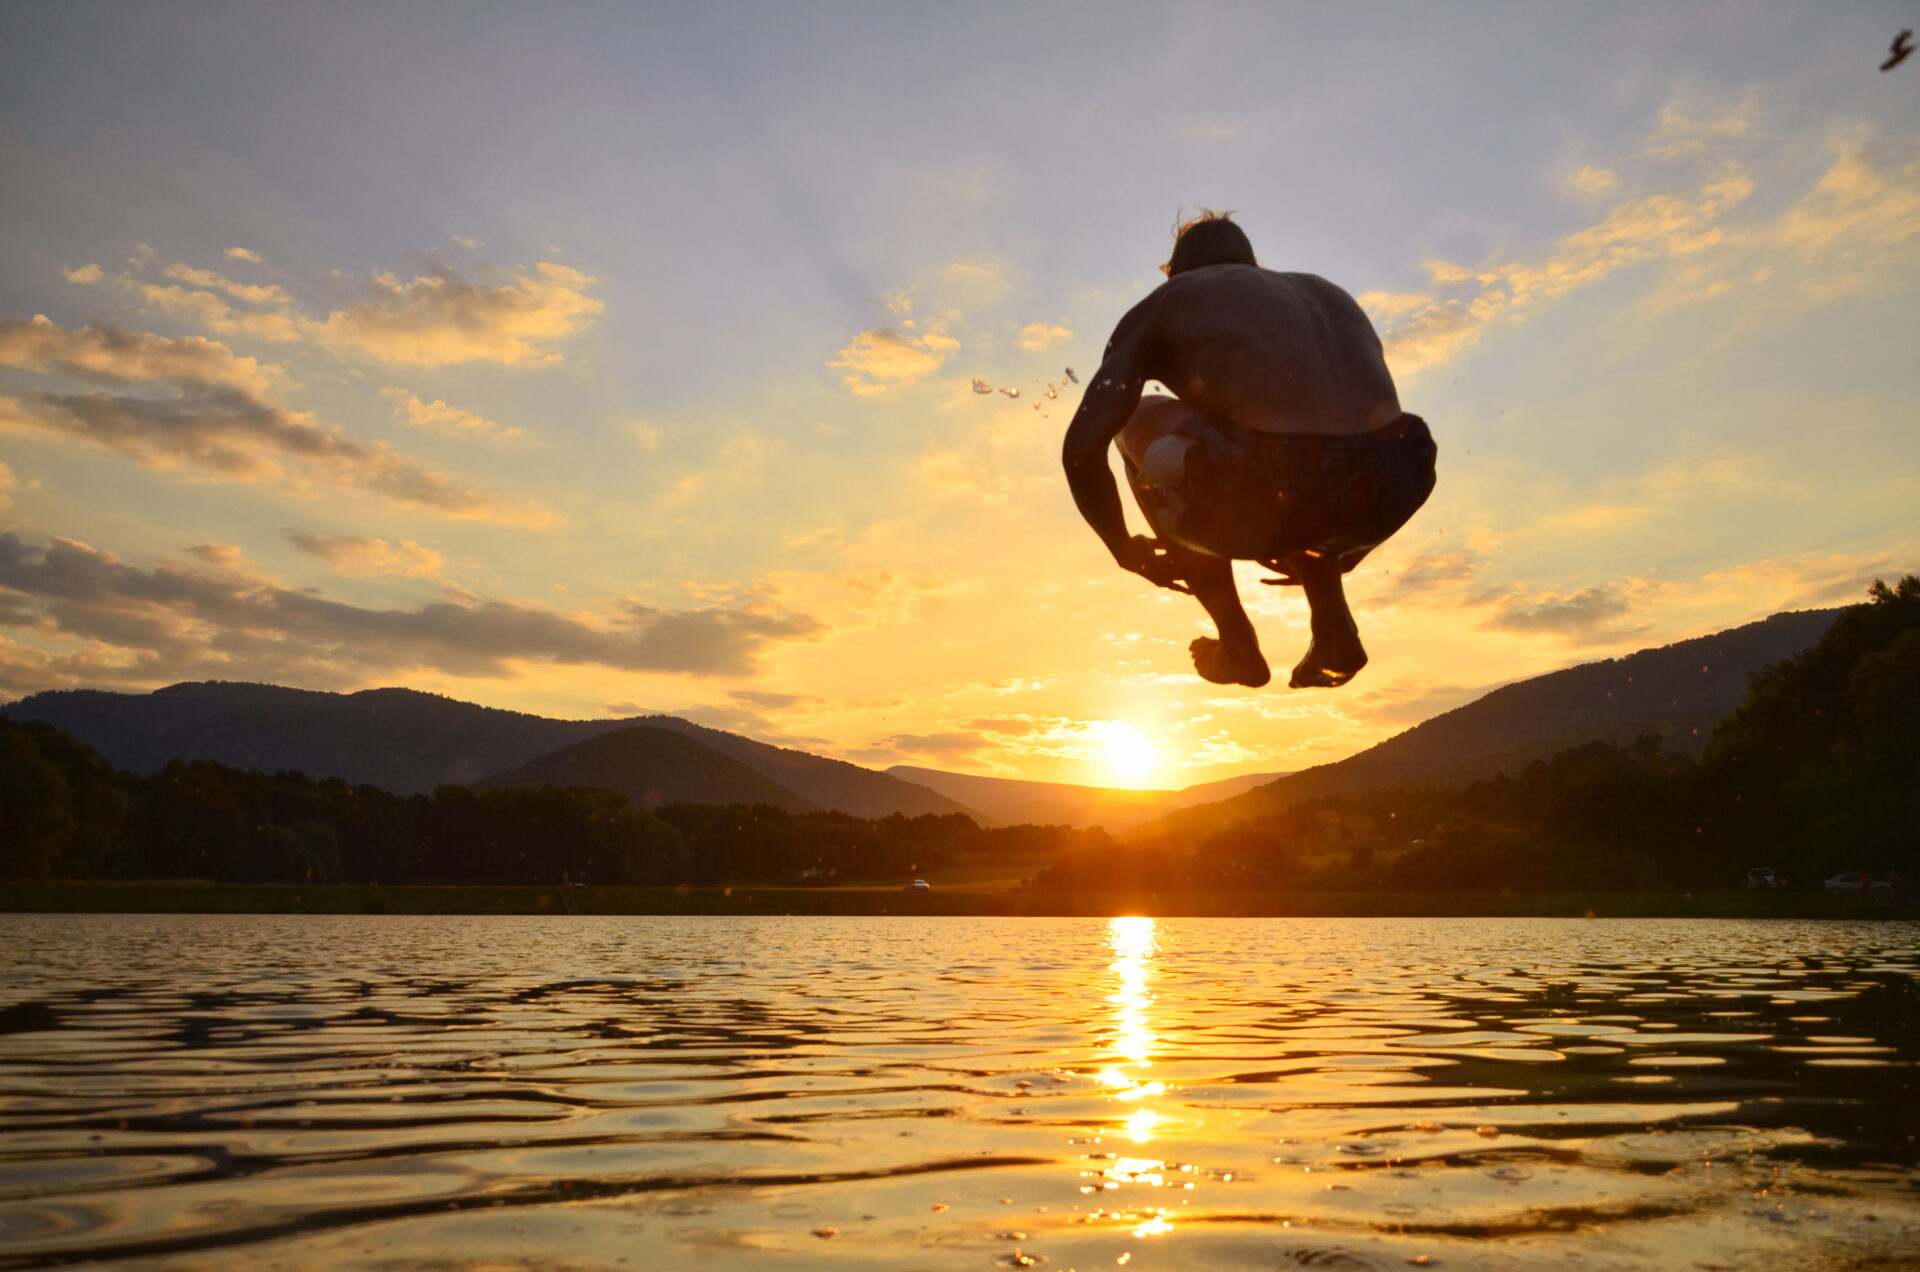 image of a man jumping in to a lake from a cliff jumping spot in ct.